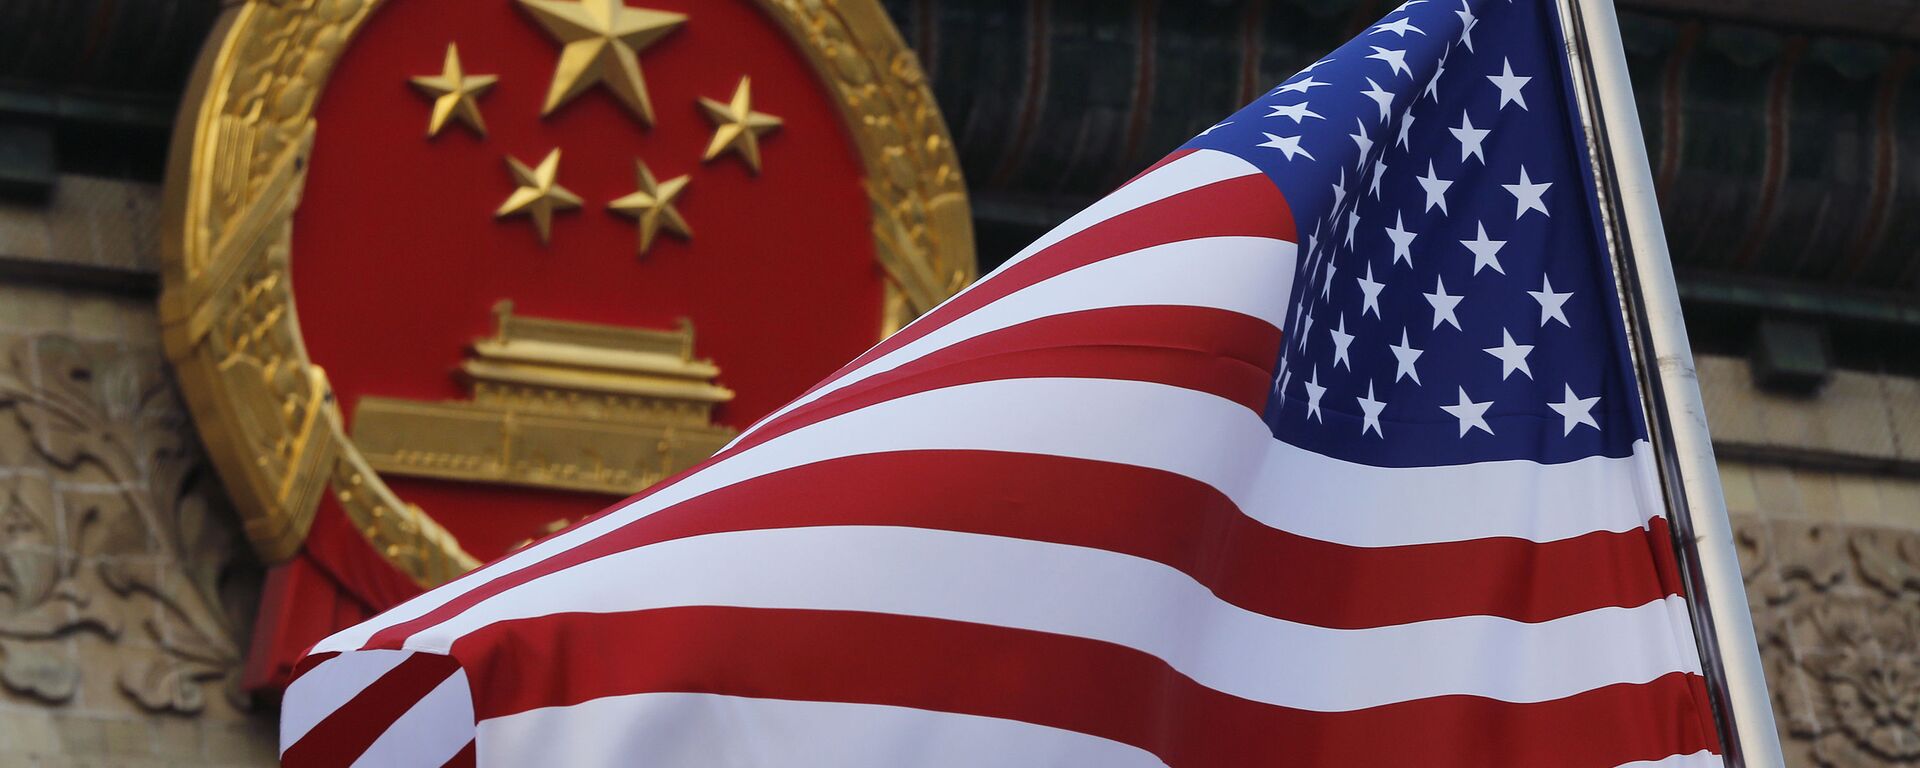 In this Nov. 9, 2017, file photo, an American flag is flown next to the Chinese national emblem during a welcome ceremony for visiting U.S. President Donald Trump outside the Great Hall of the People in Beijing.  - Sputnik International, 1920, 13.09.2021